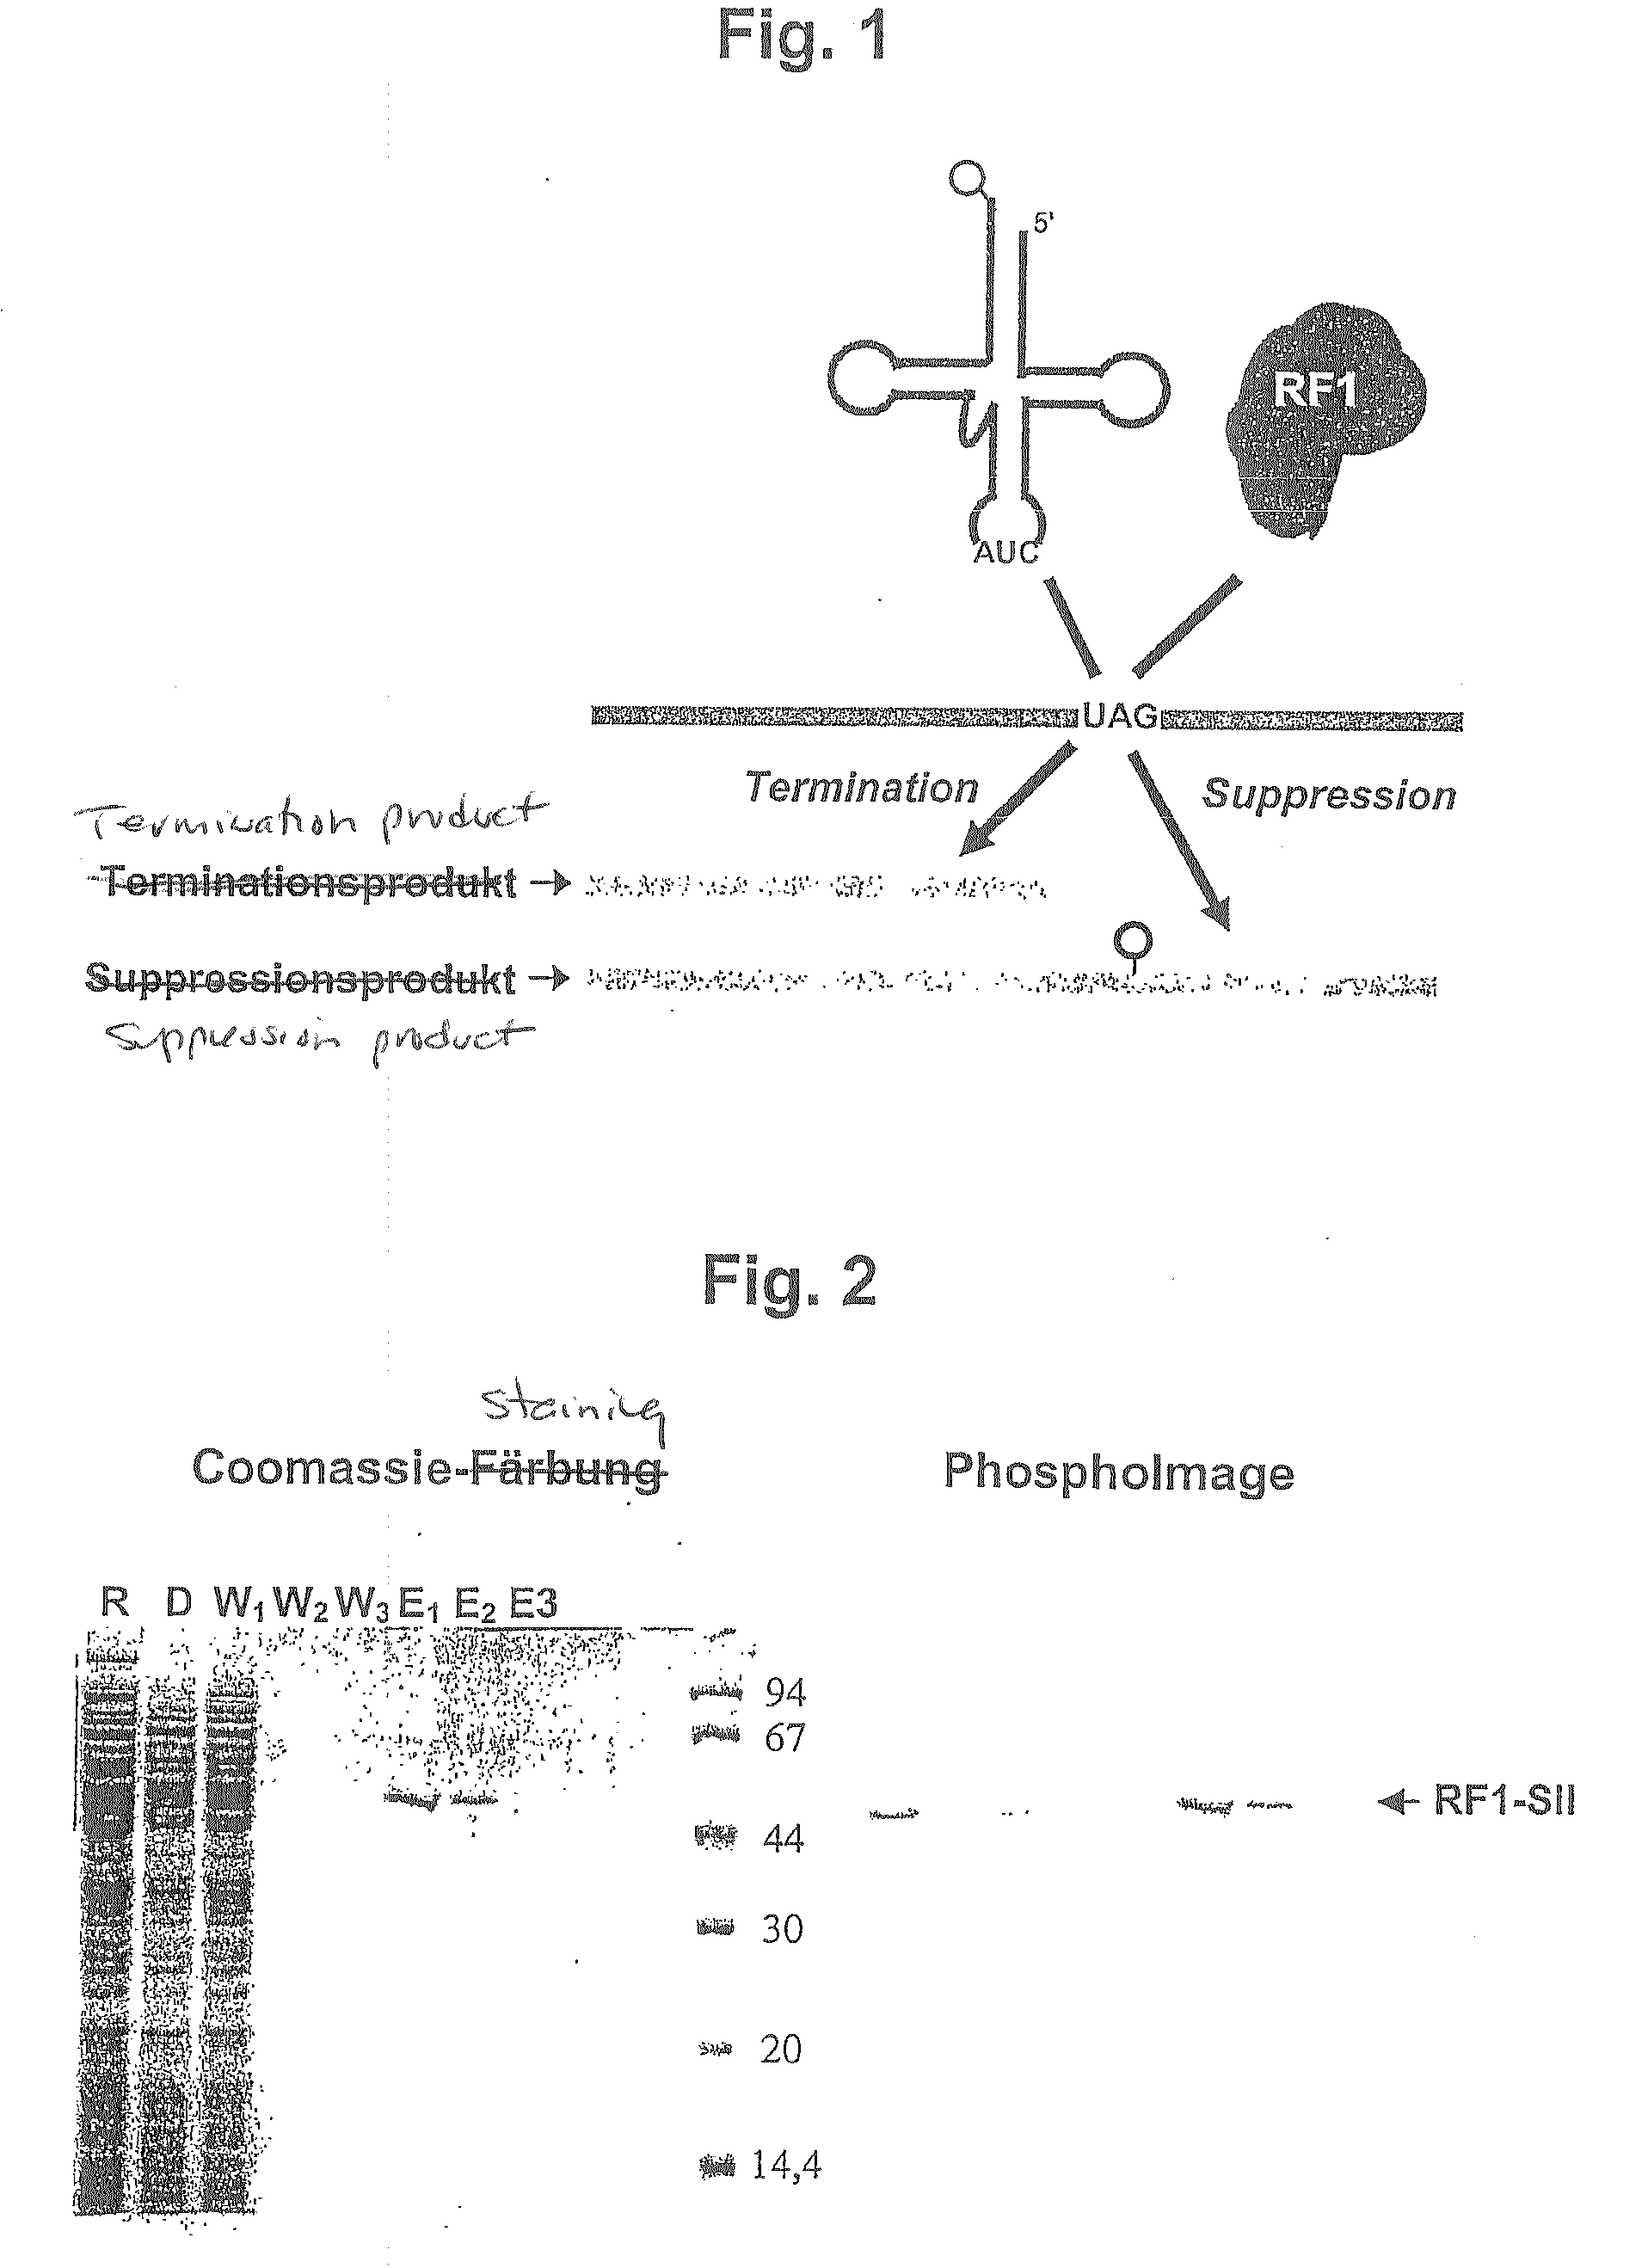 Method for the production of a lysate used for cell-free protein biosynthesis